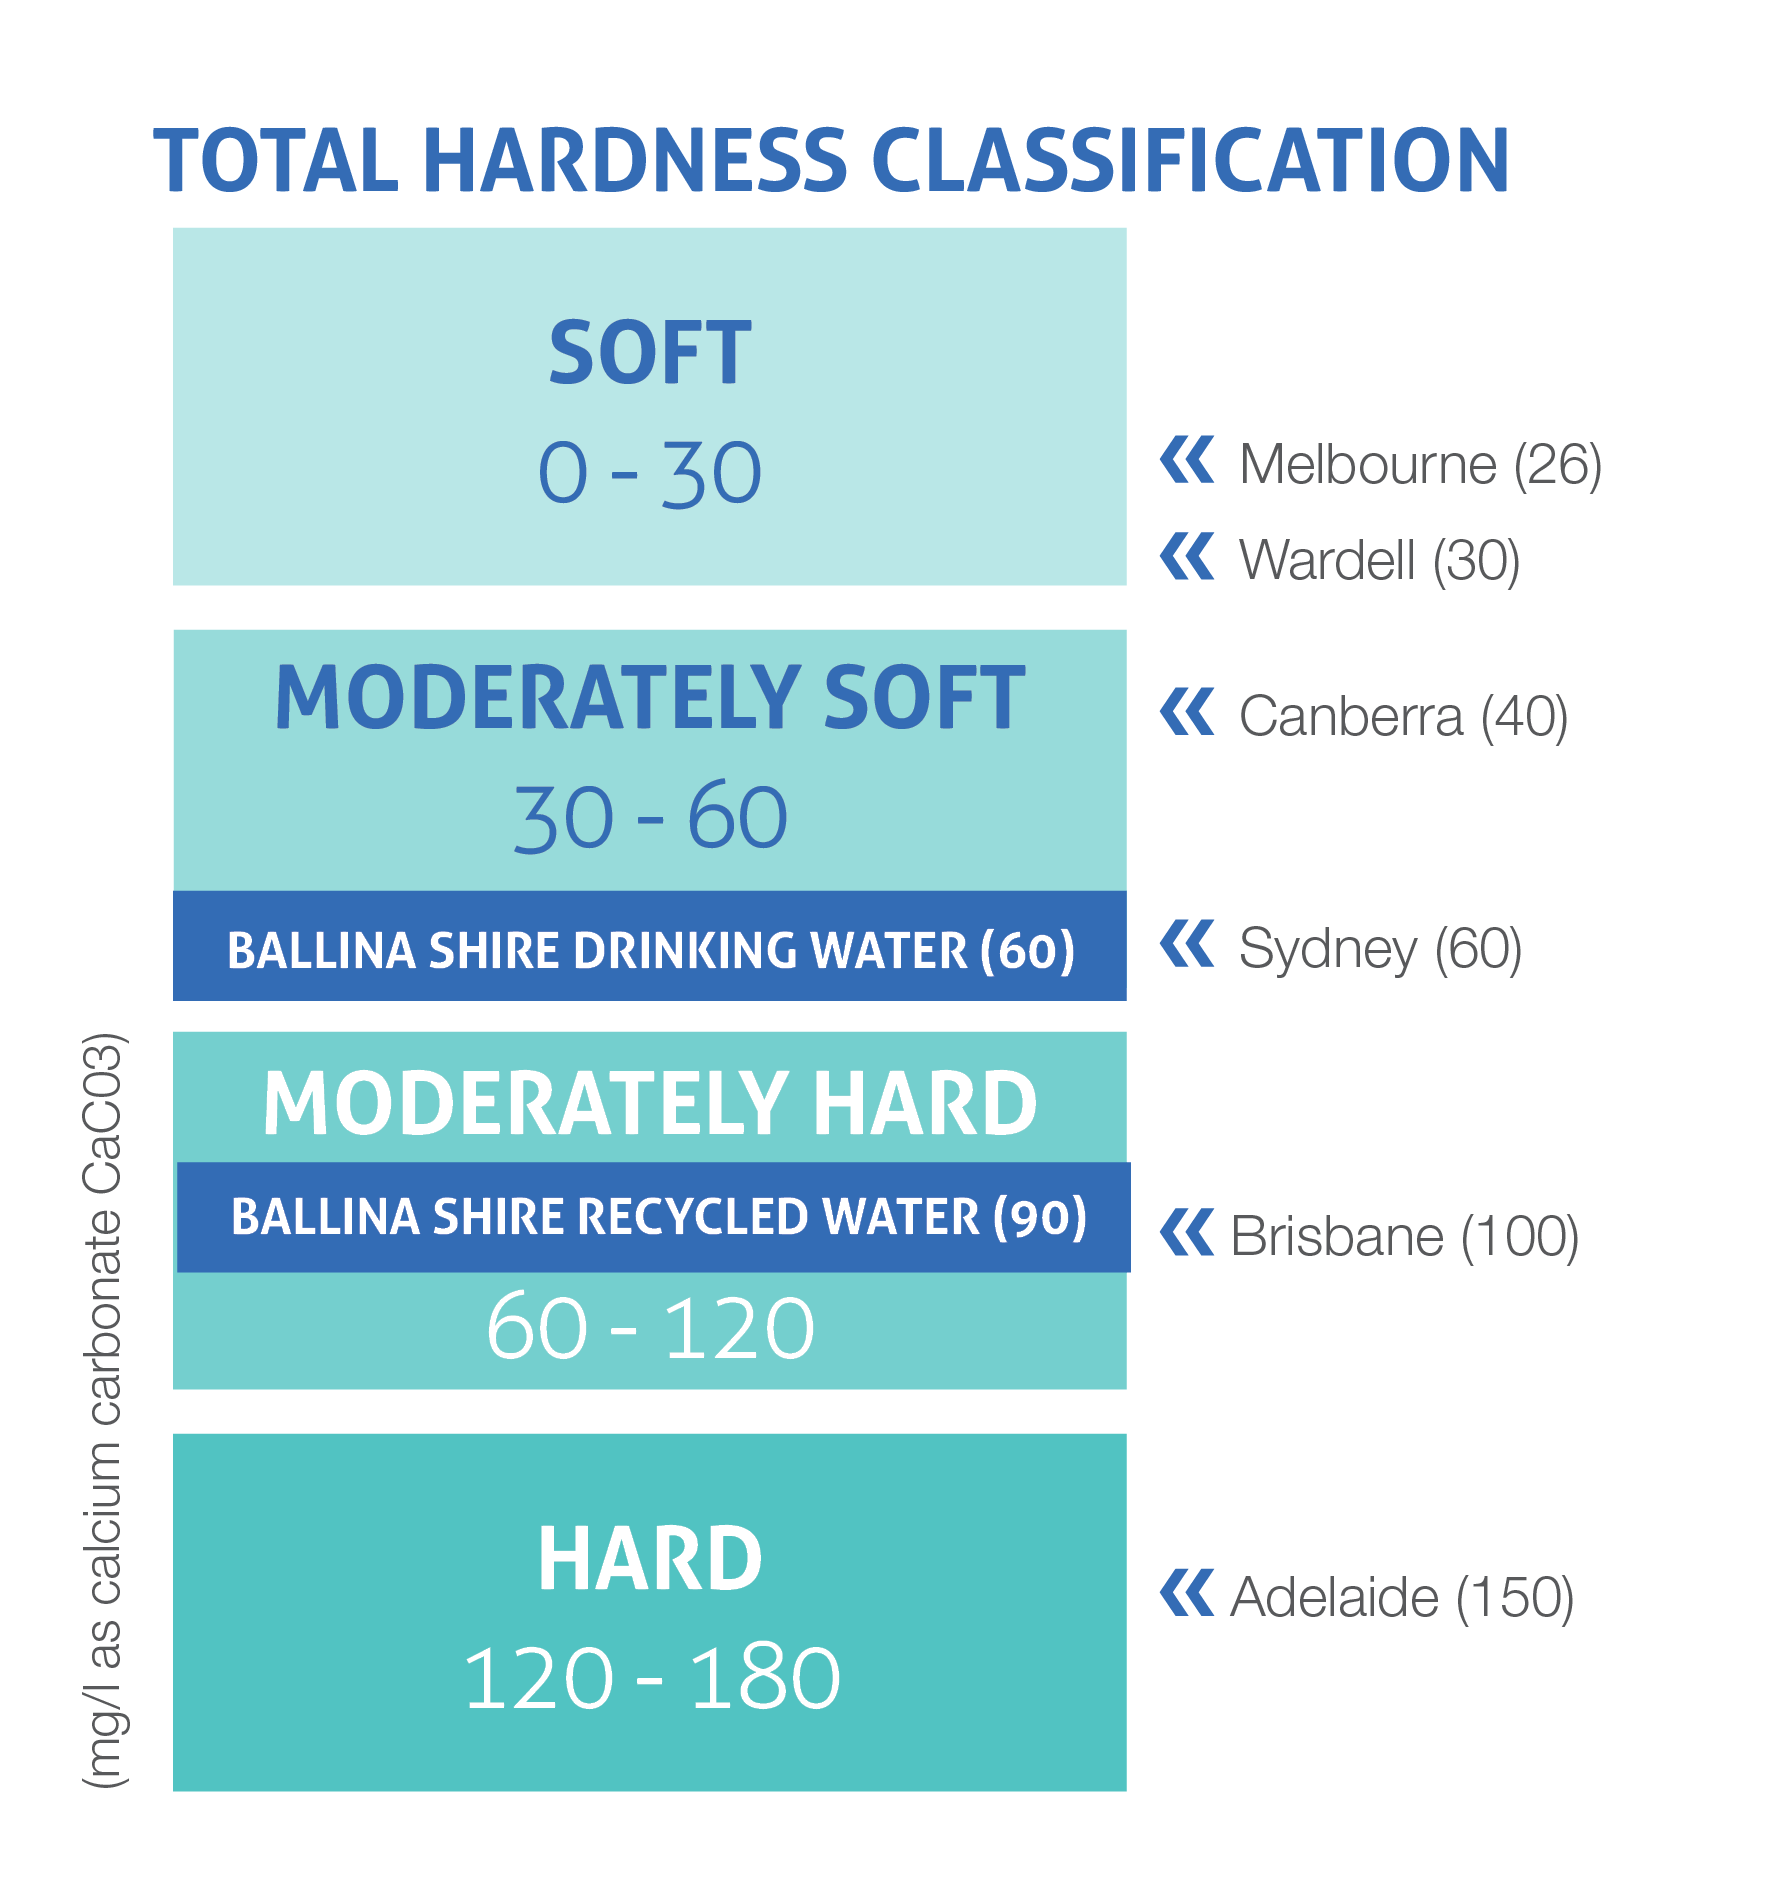 ballina-shire-council-water-and-recycled-water-services-water-hardness